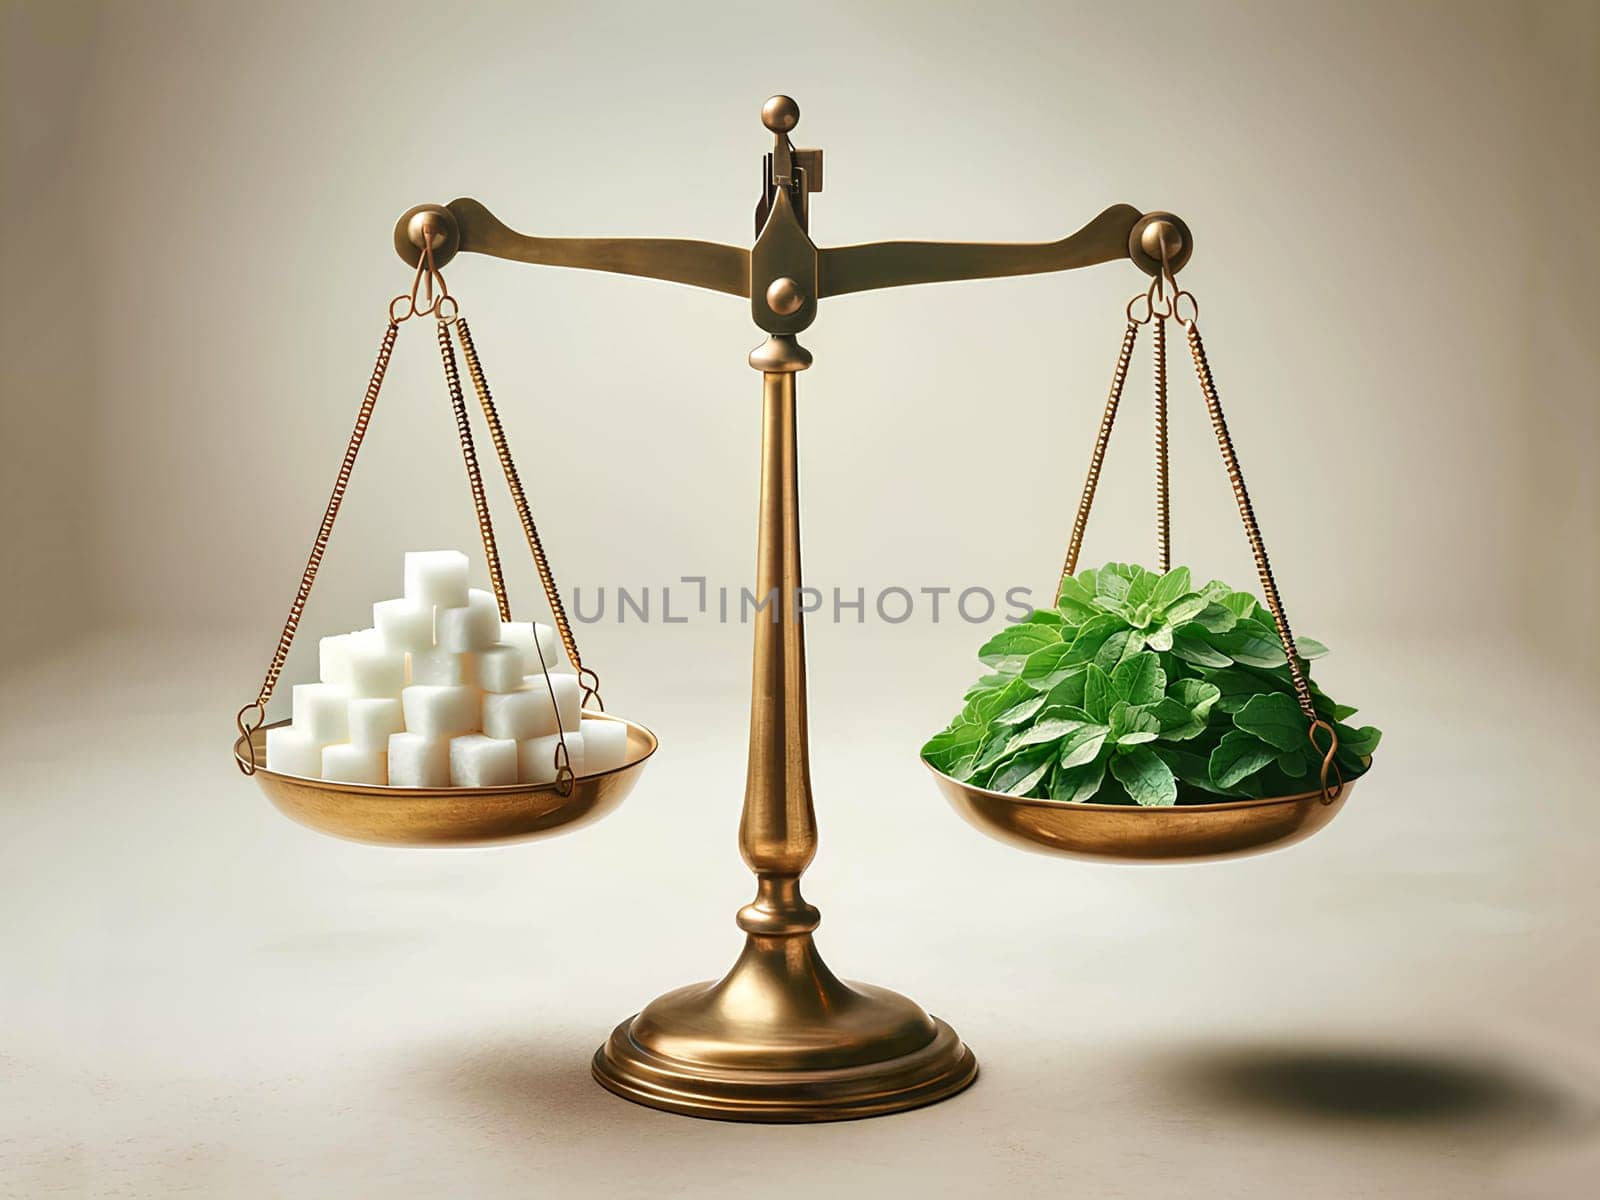 scales with two bowls on a light neutral background. On one bowl there are a few pieces of white sugar, on the other there are fresh stevia leaves by Annado